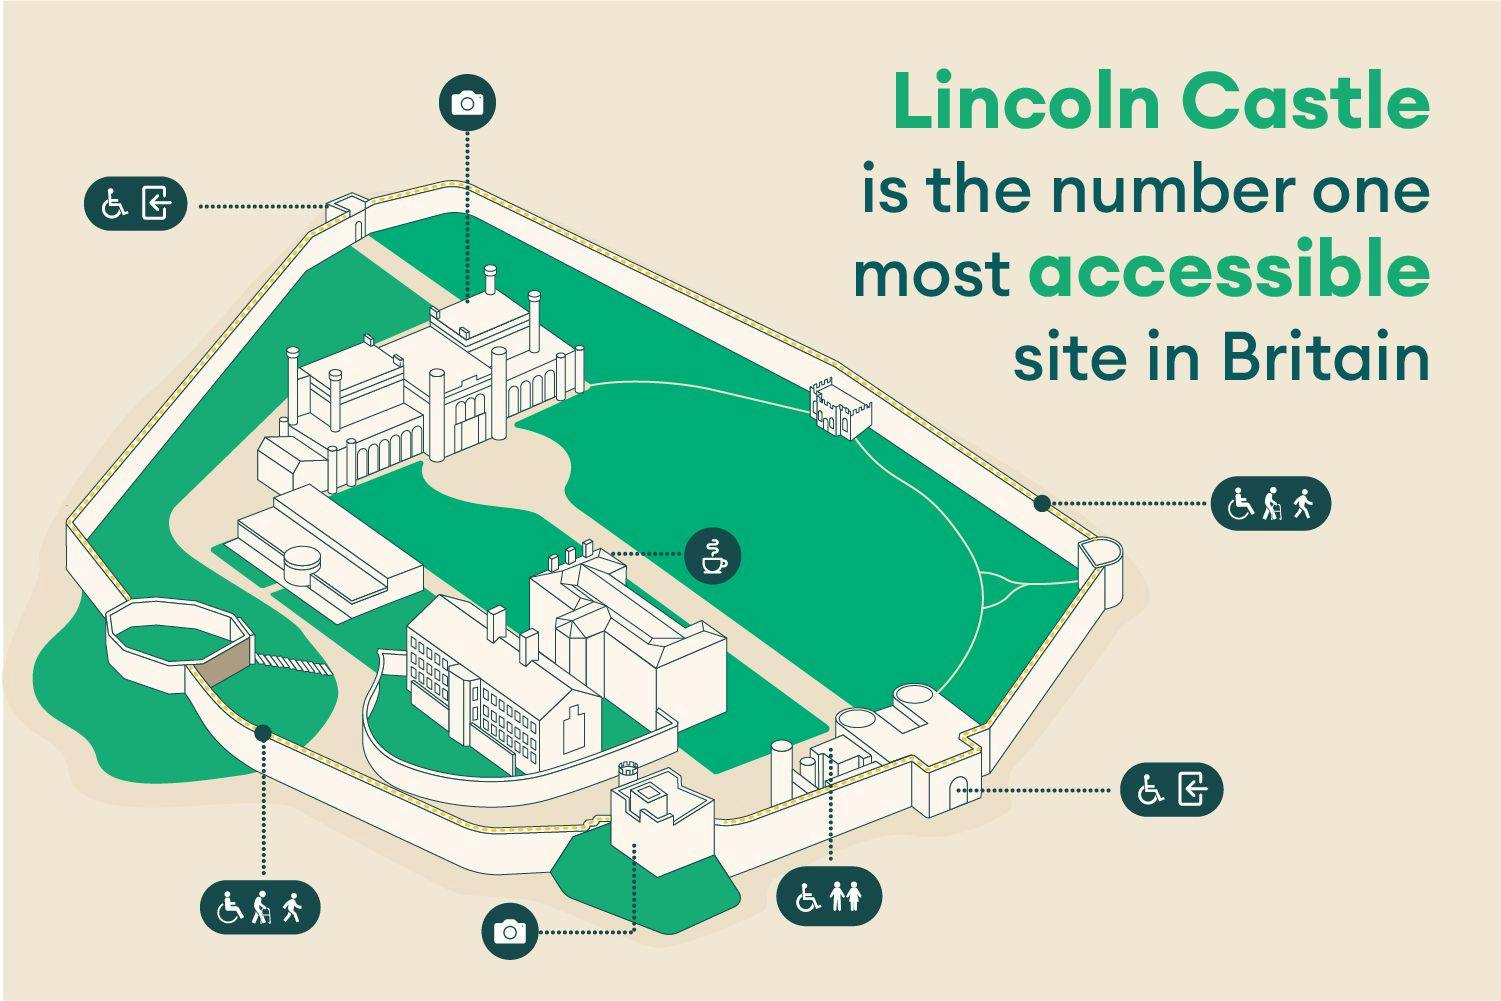 Lincoln Castle is the number one most accessible site in Britain